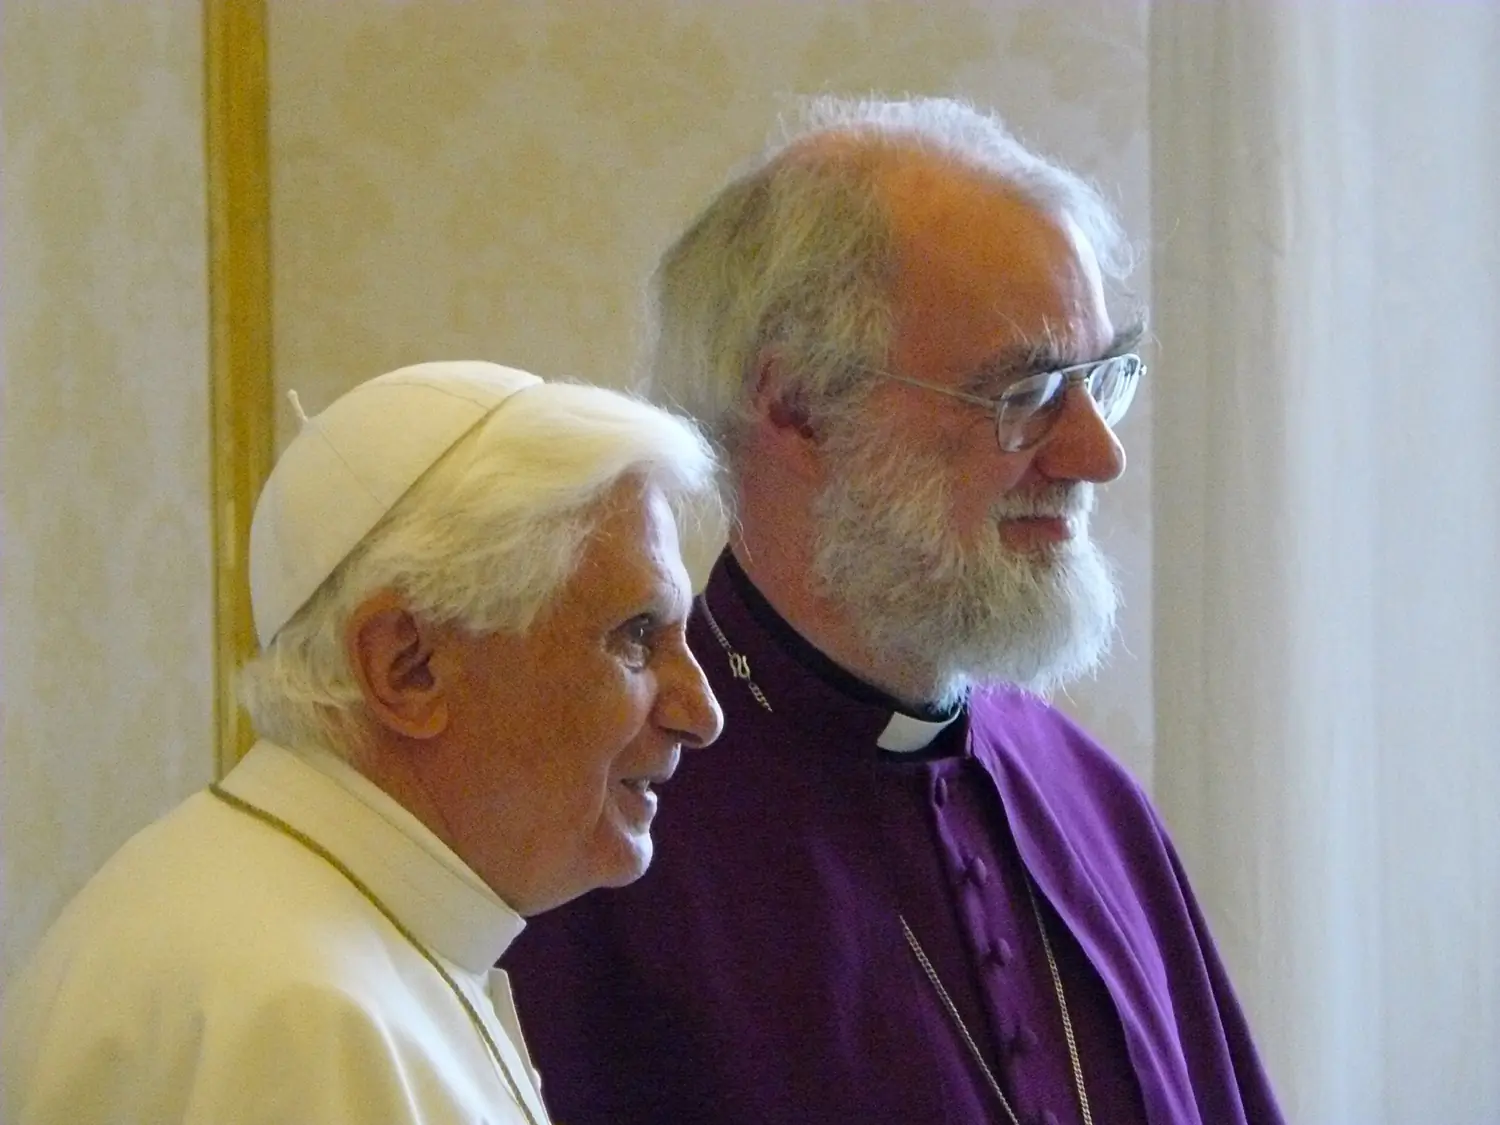 Pope Benedict XVI and the then-Archbishop of Canterbury, Rowan Williams, hold a private meeting in the Pope's study at the Vatican